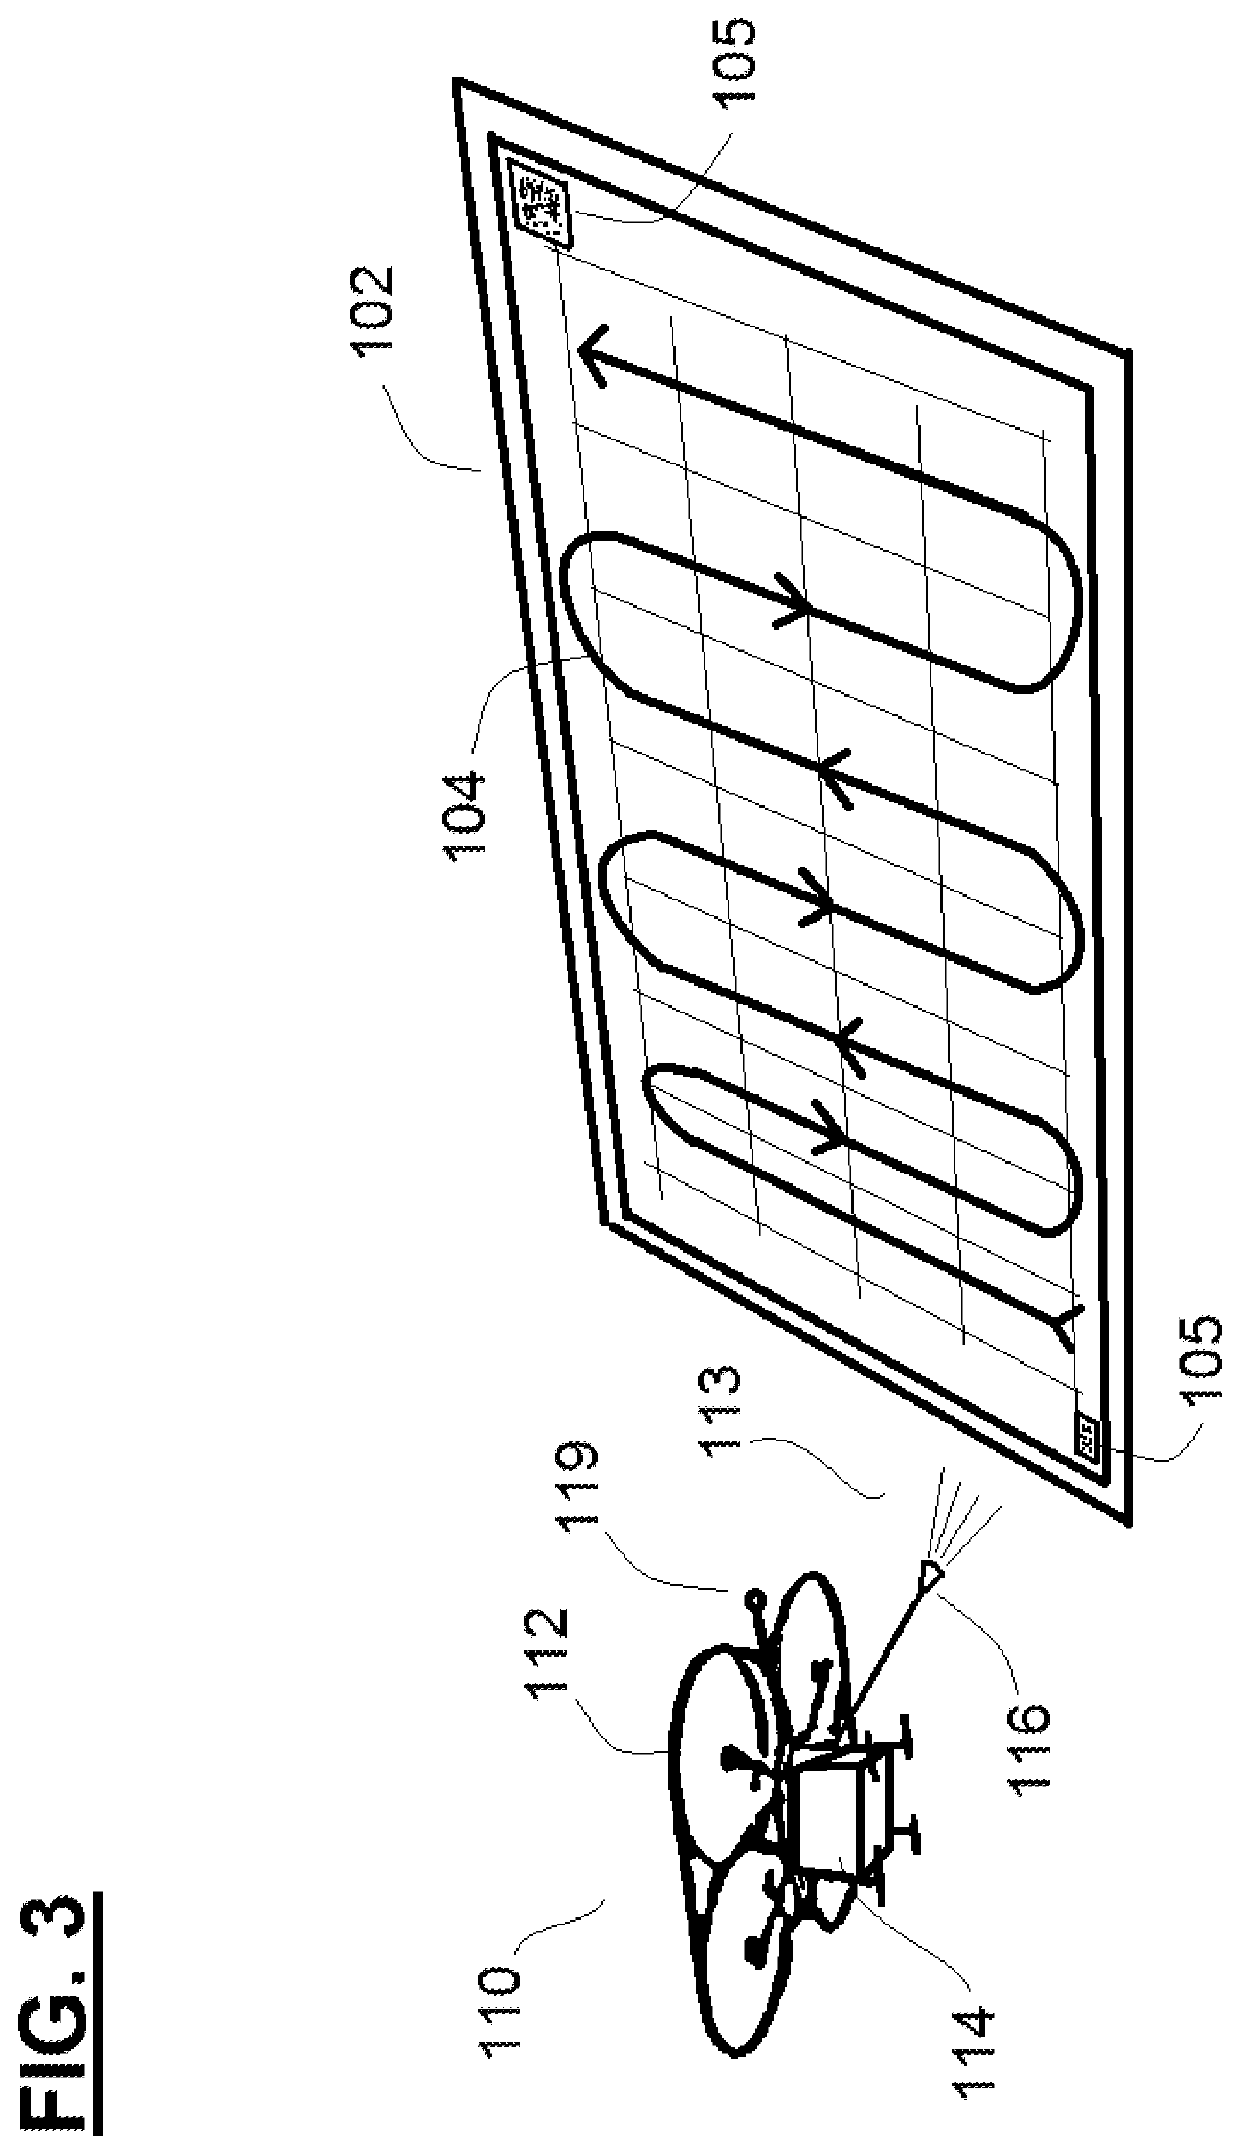 Drone systems for cleaning solar panels and methods of using the same